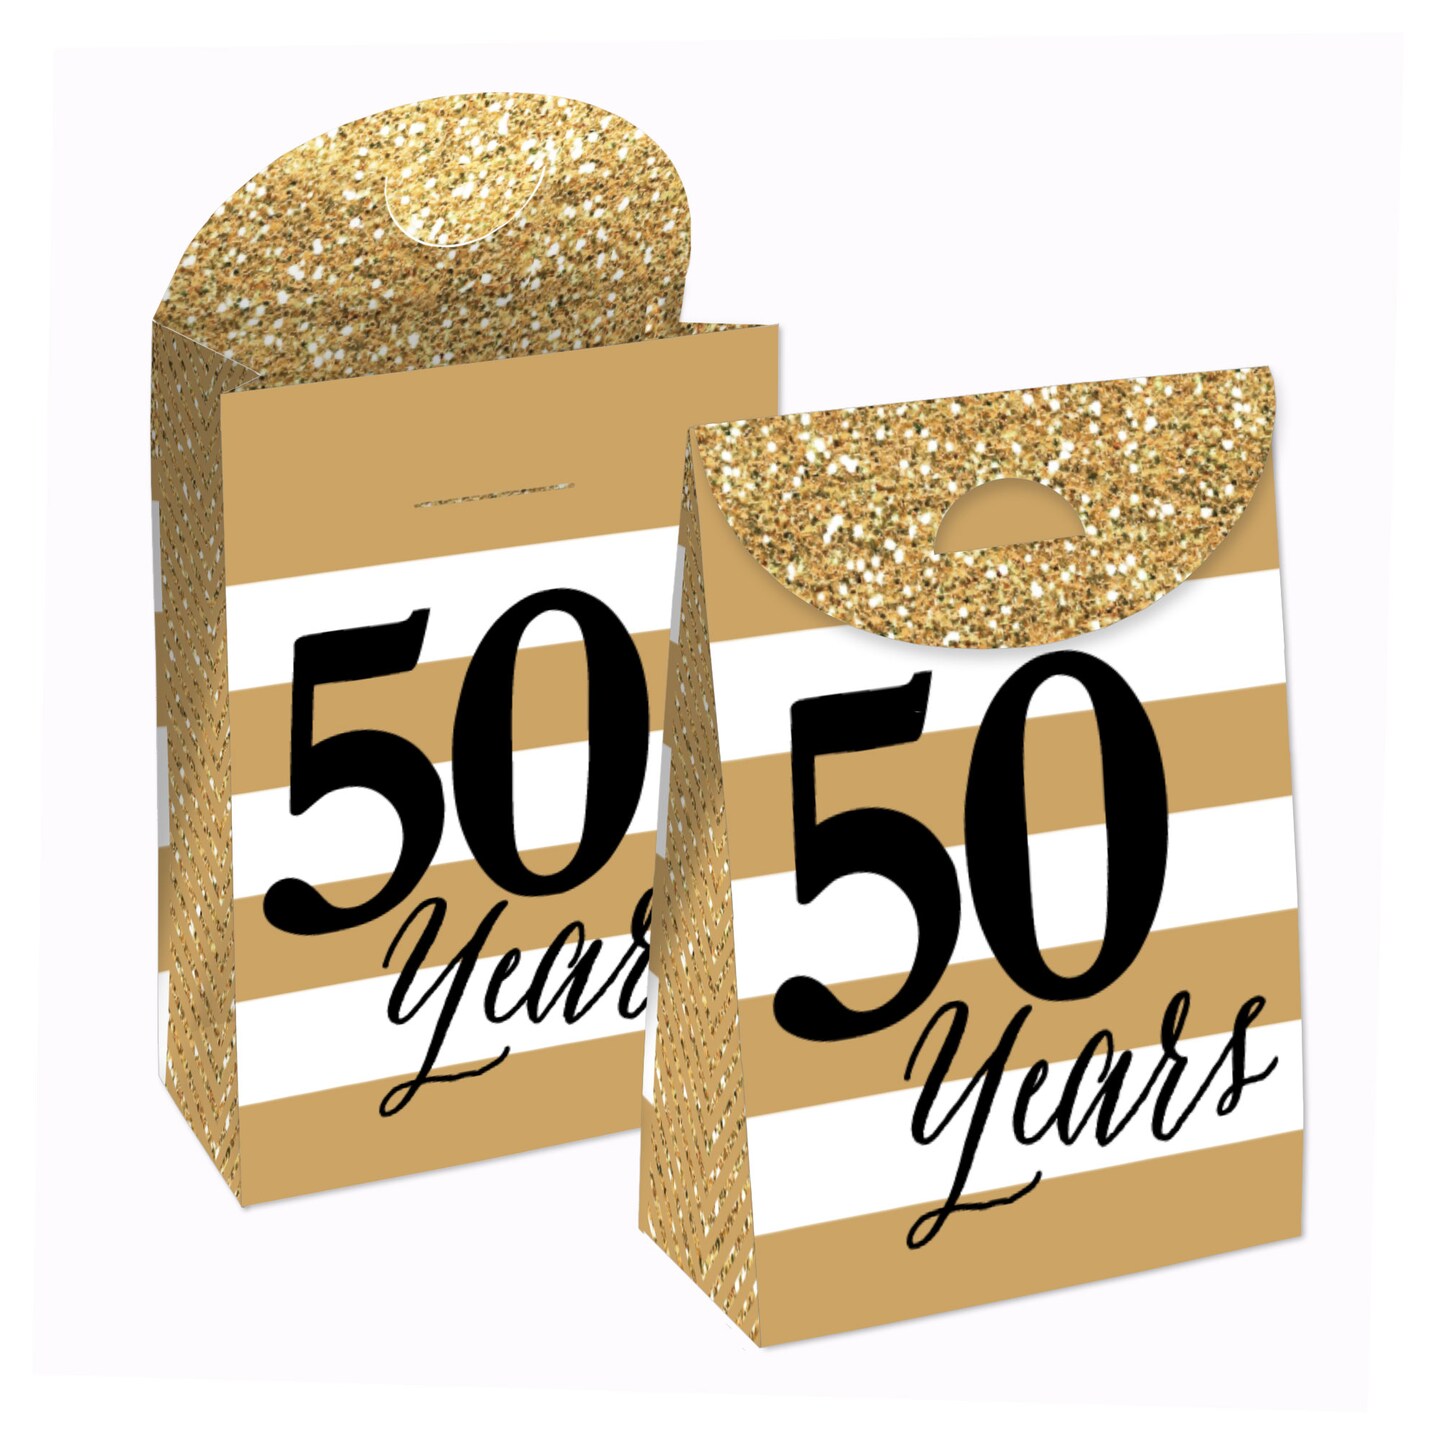 50th Wedding Anniversary Gifts for Parents, 50th Anniversary Decorations  for Party, Golden Anniversary 50 Year Gifts, 50th Anniversary Gifts for  Couples, Gift with 50th Anniversary Card 2119BW - Walmart.com